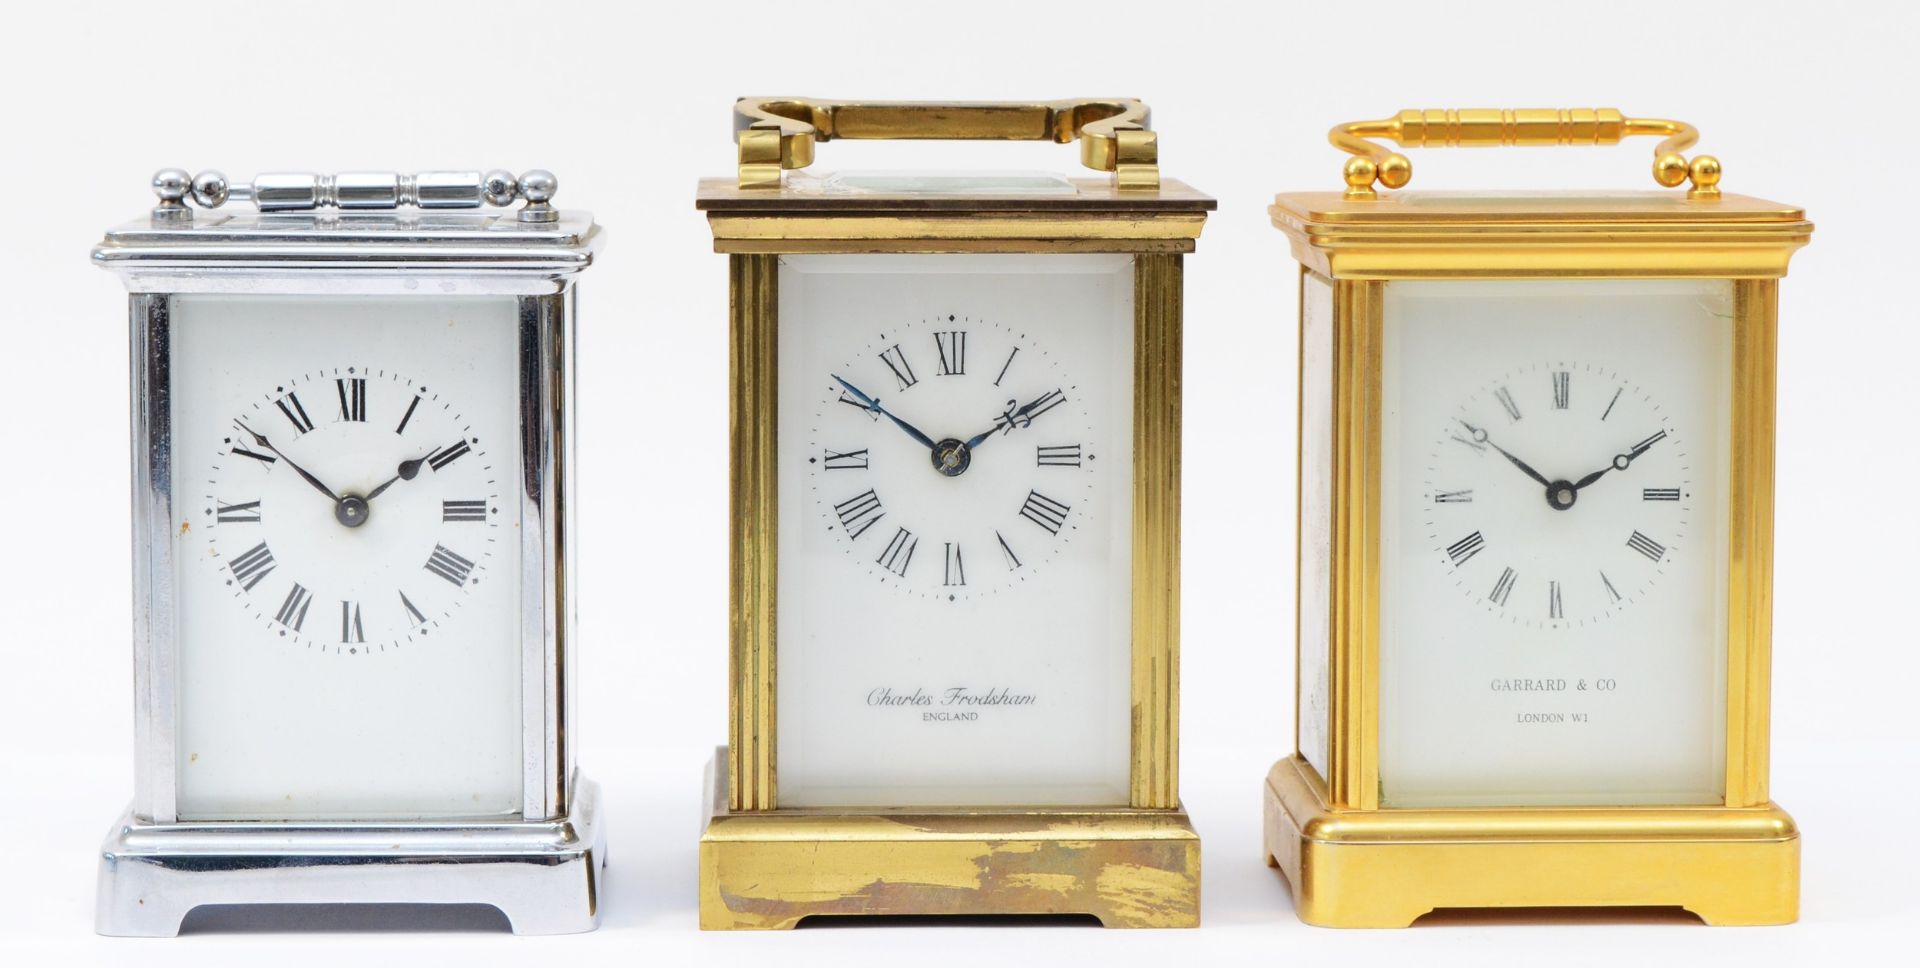 Two 20th century brass 8 day carriage clocks, enamelled dials with Roman numerals, together with a